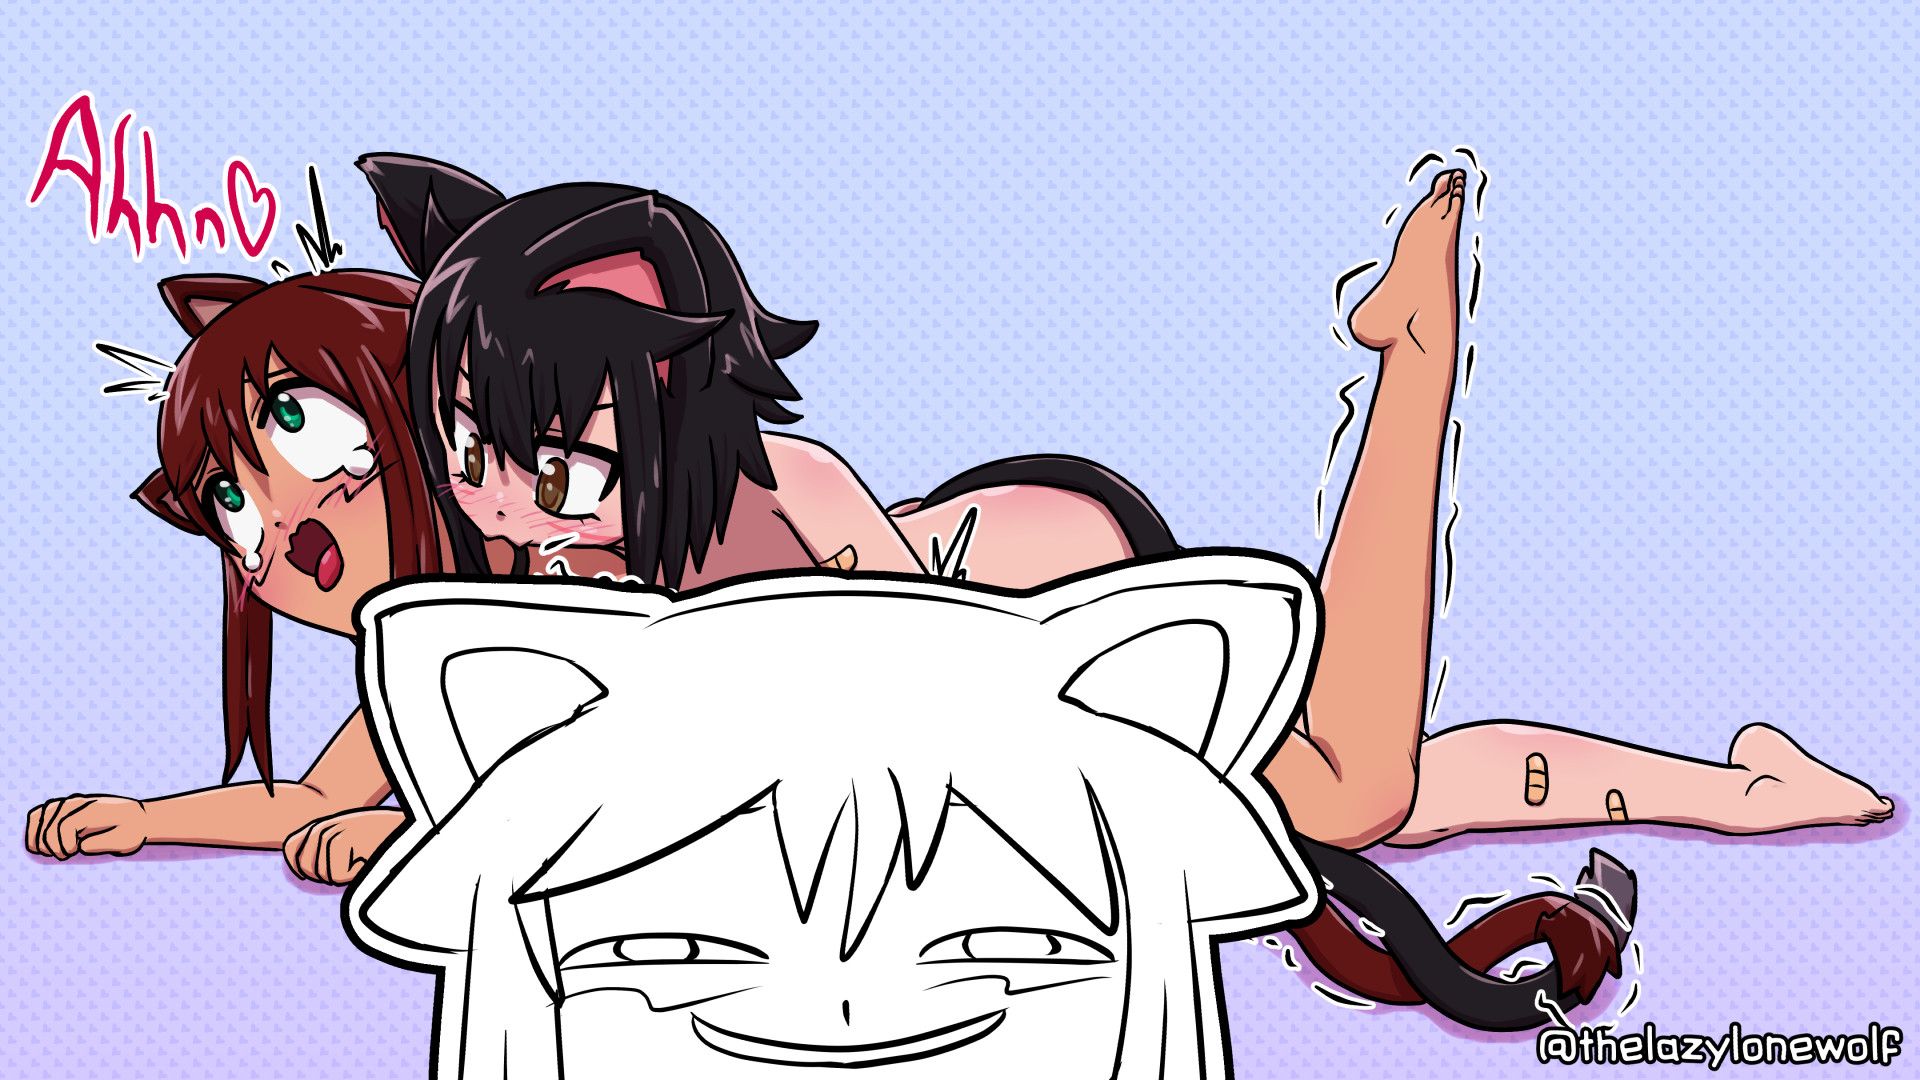 NSFW commissioned artwork of Myan and Kitty Meow-meow having lesbian sex. Censored.